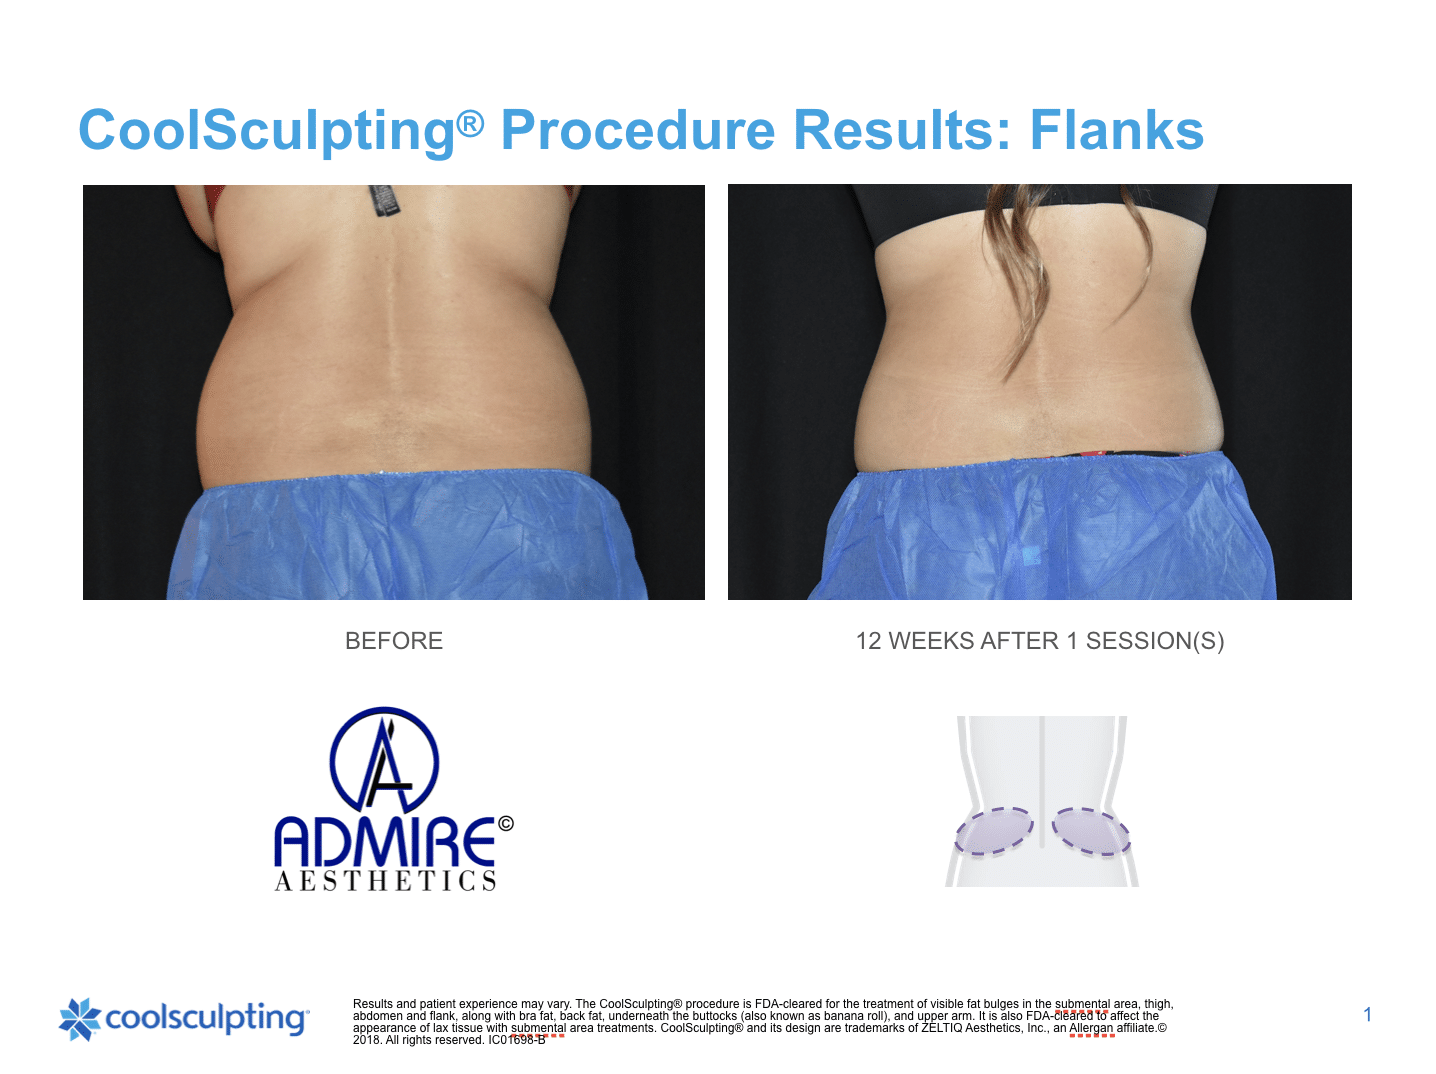 Womans back flanks before and after Coolsculpting treatment at Admire Aesthetics.